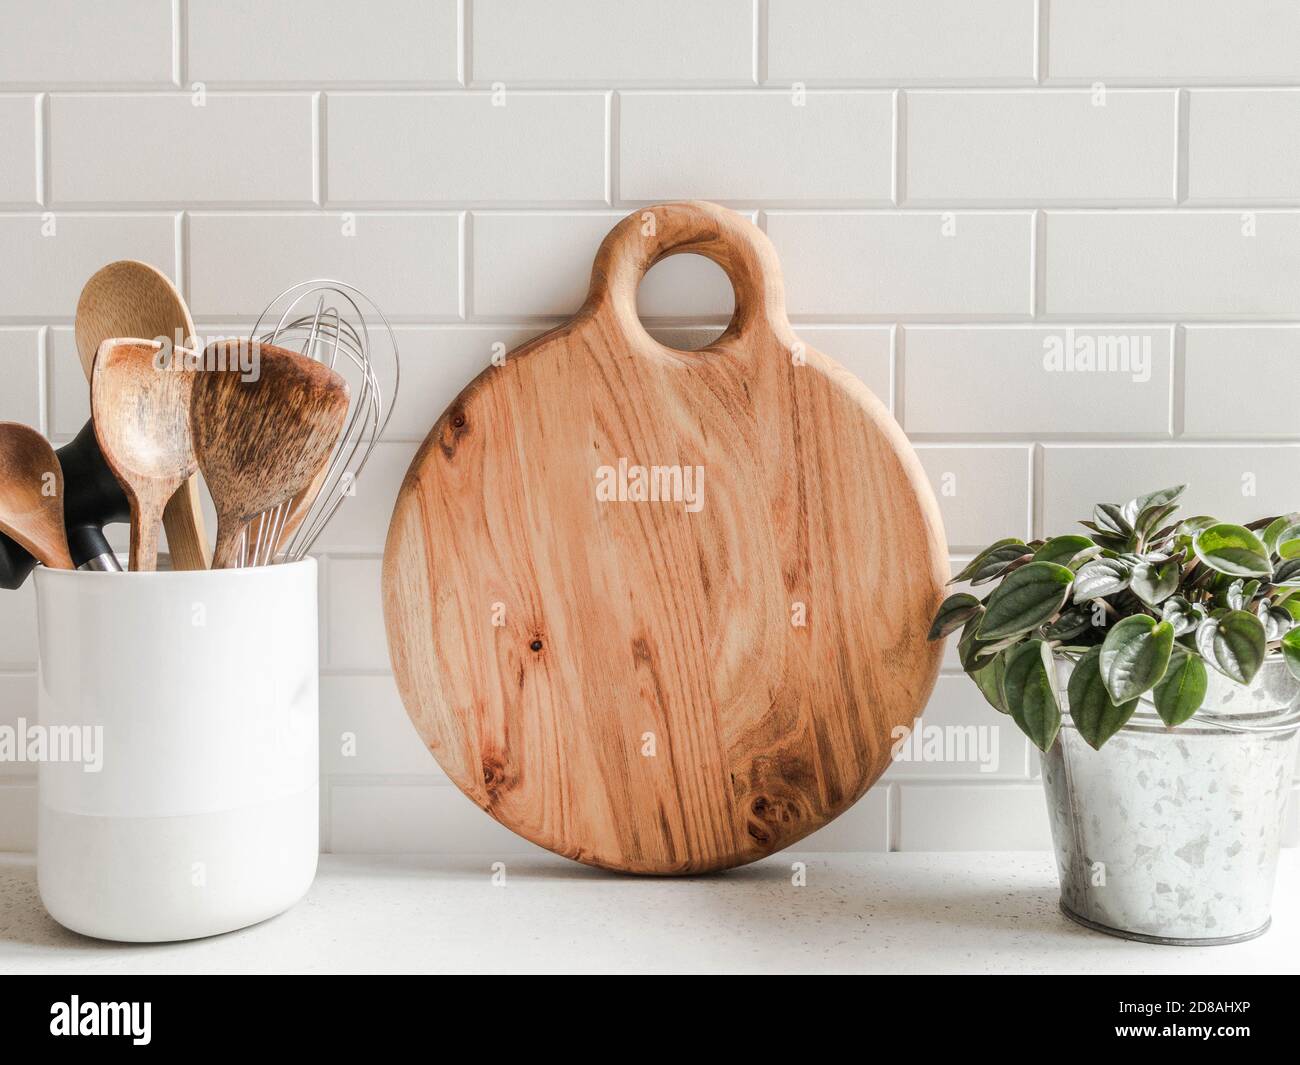 Stylish white kitchen background with kitchen utensils and wood cutting board for text on white countertop, copy space, front view Stock Photo